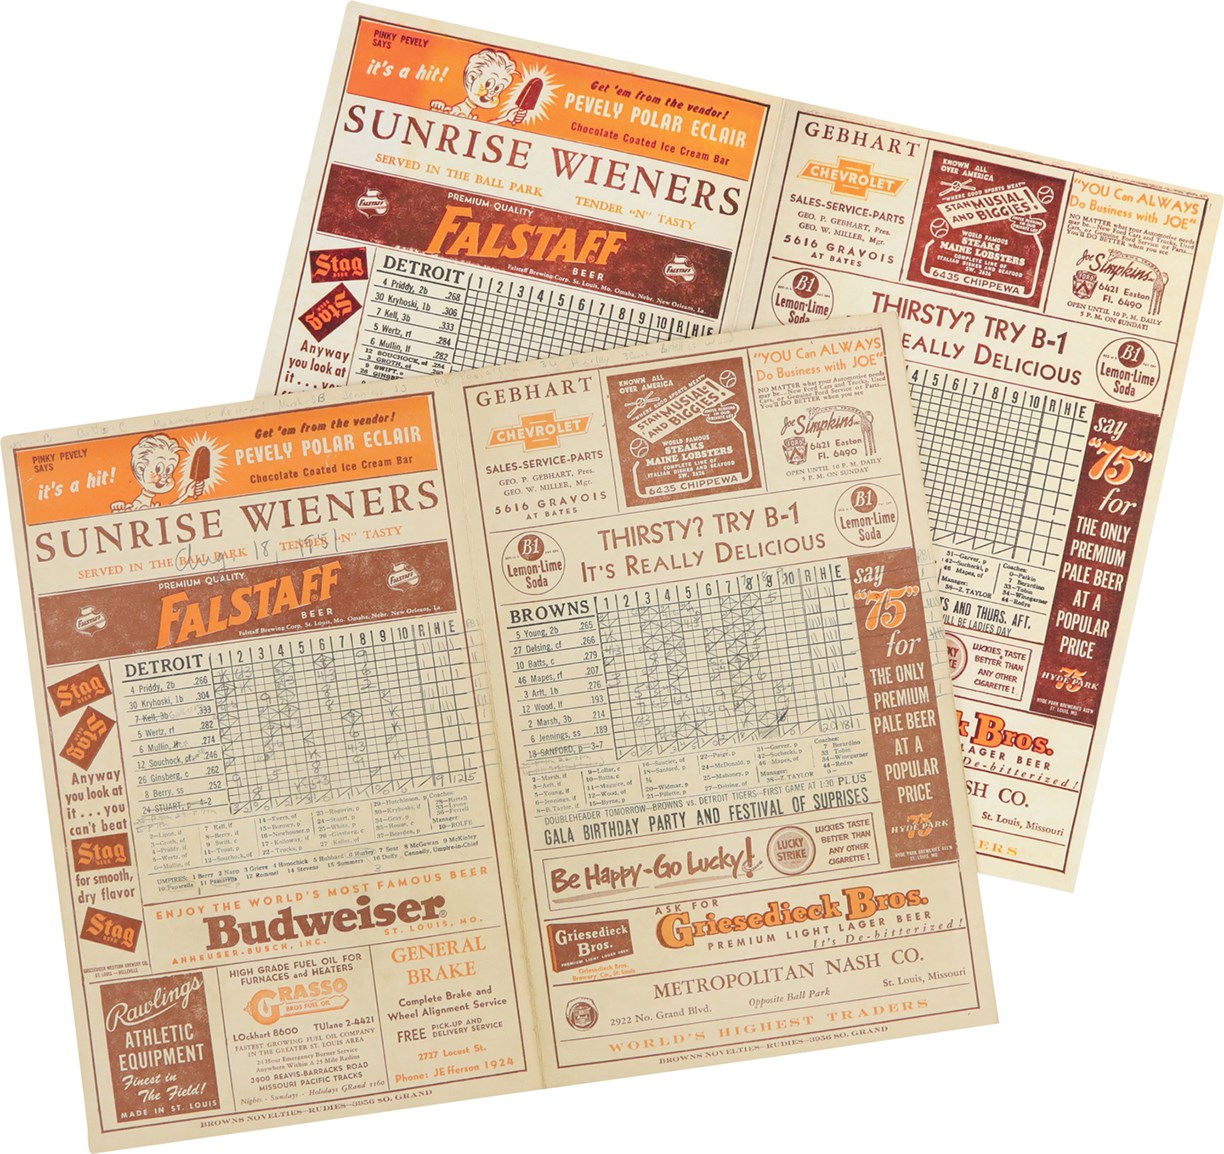 - August 18, 1951 Eddie Gaedel Original Scorecard from Game before Debut with Reproduction Scorecard from Debut Game